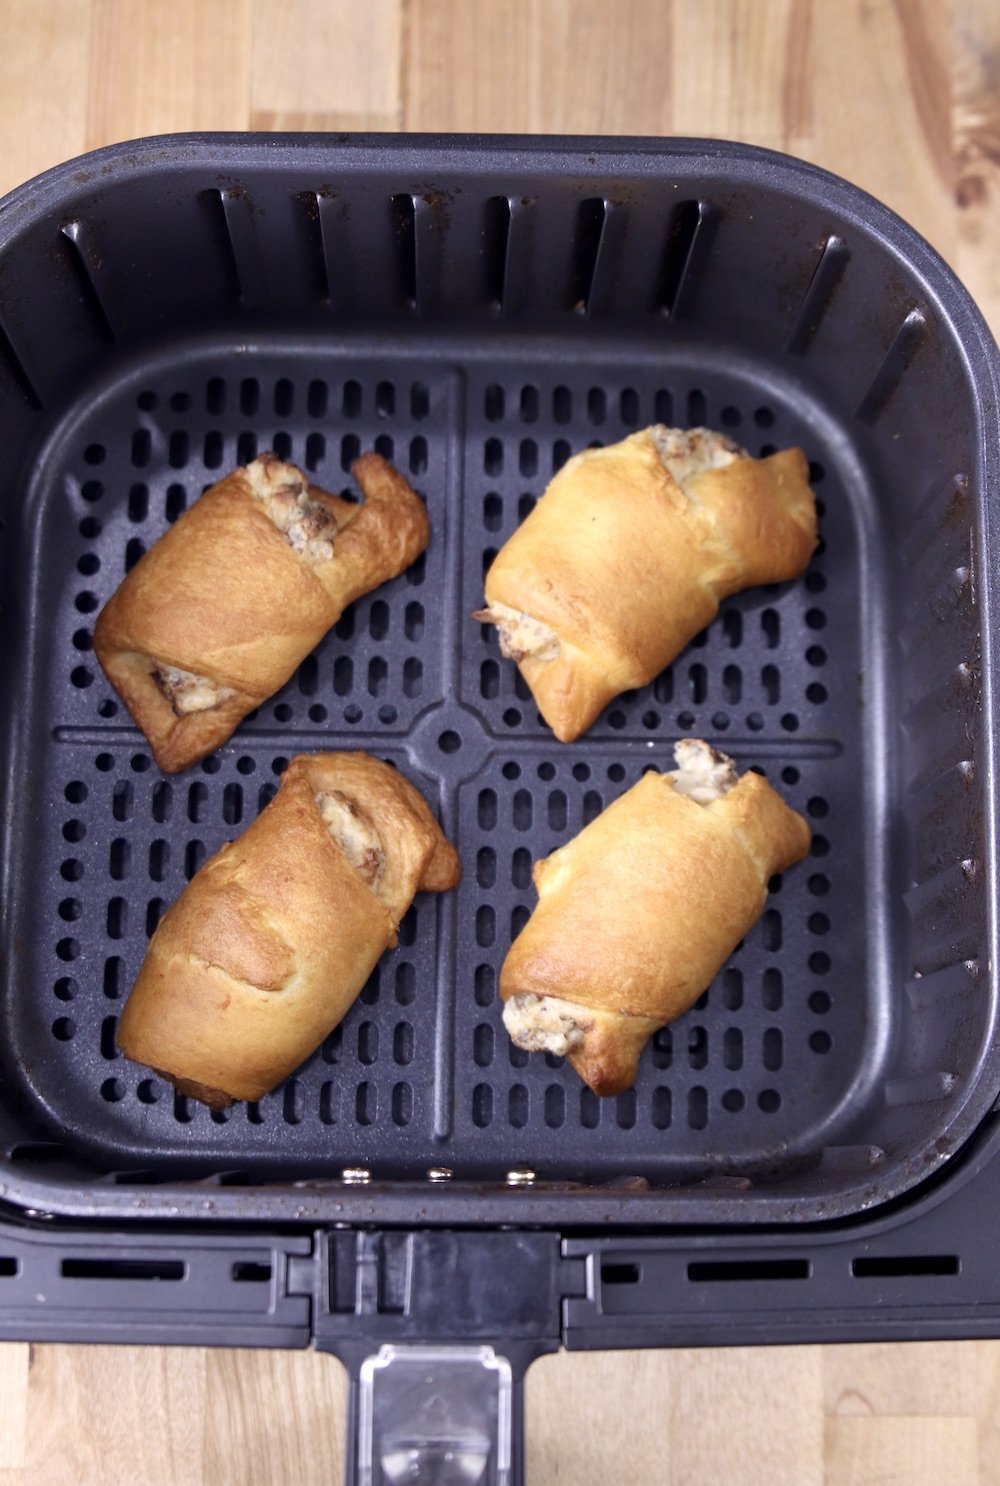 4 cooked sausage cream cheese crescents in air fryer basket